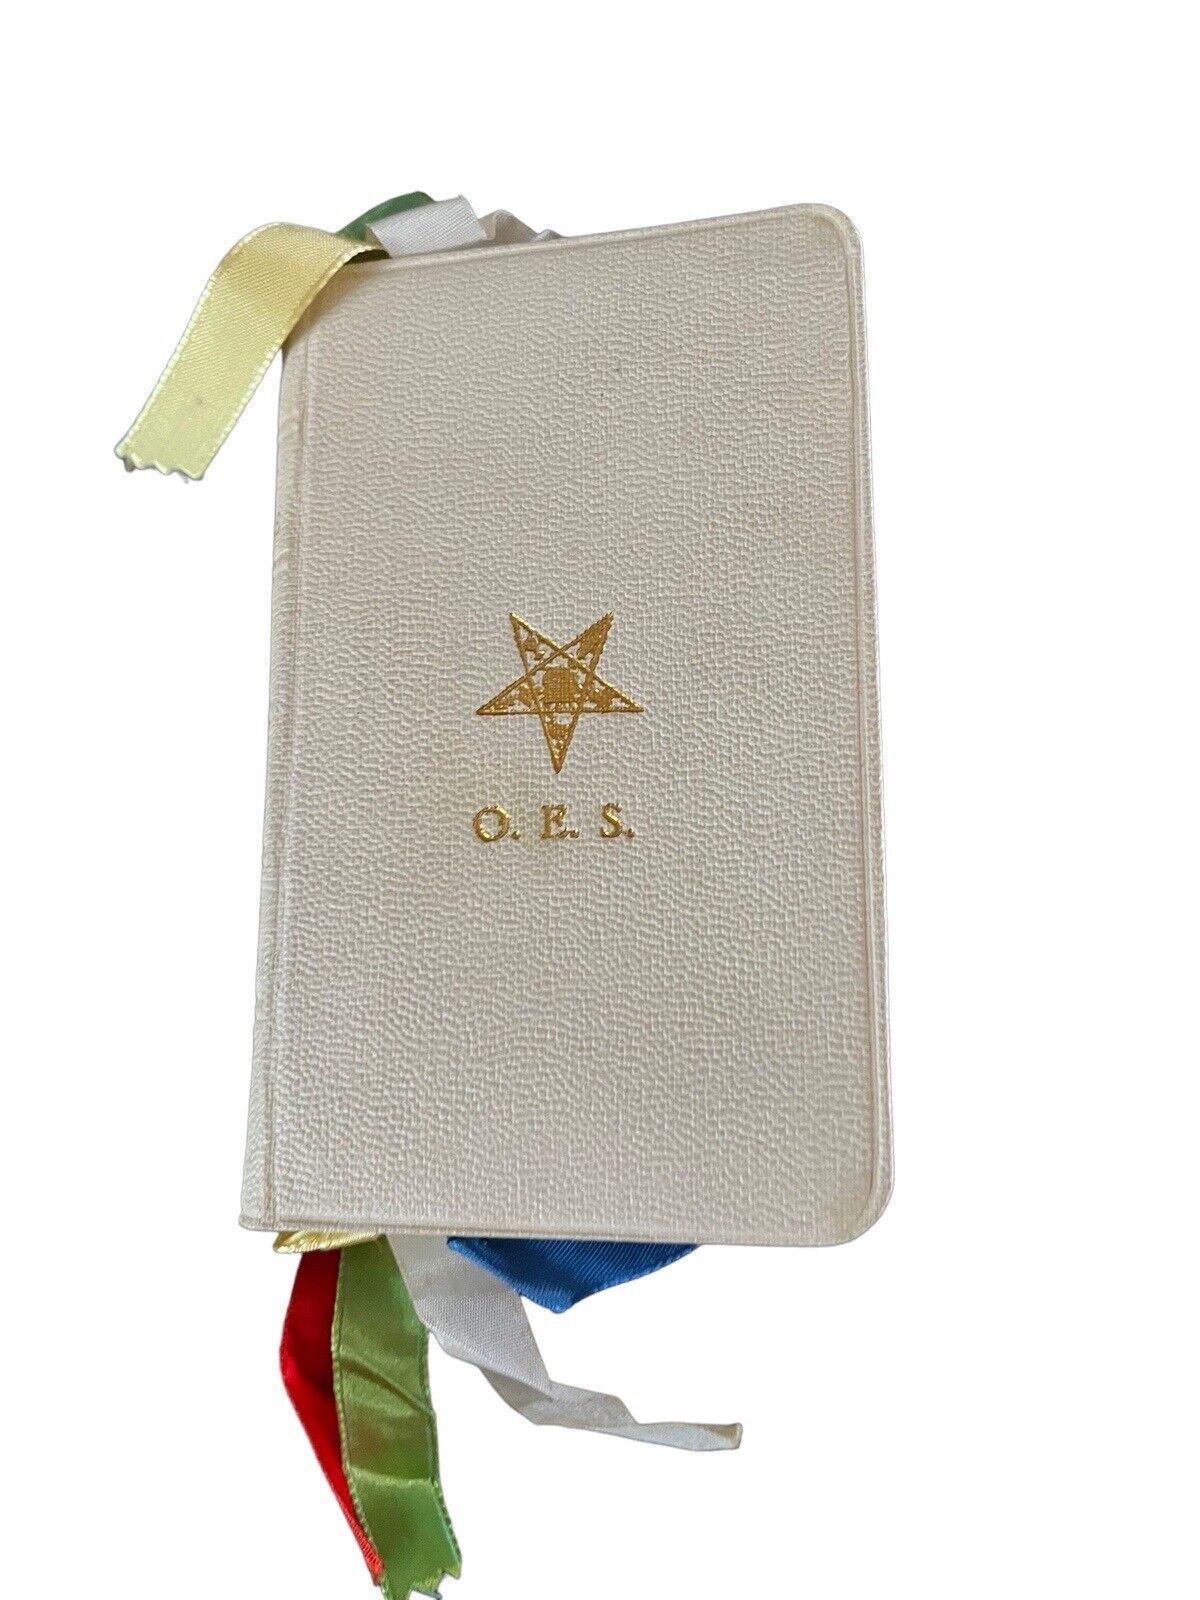 Masonic Order Of The Eastern Star Bible 1944 With Box Pocket Size Oxford Text